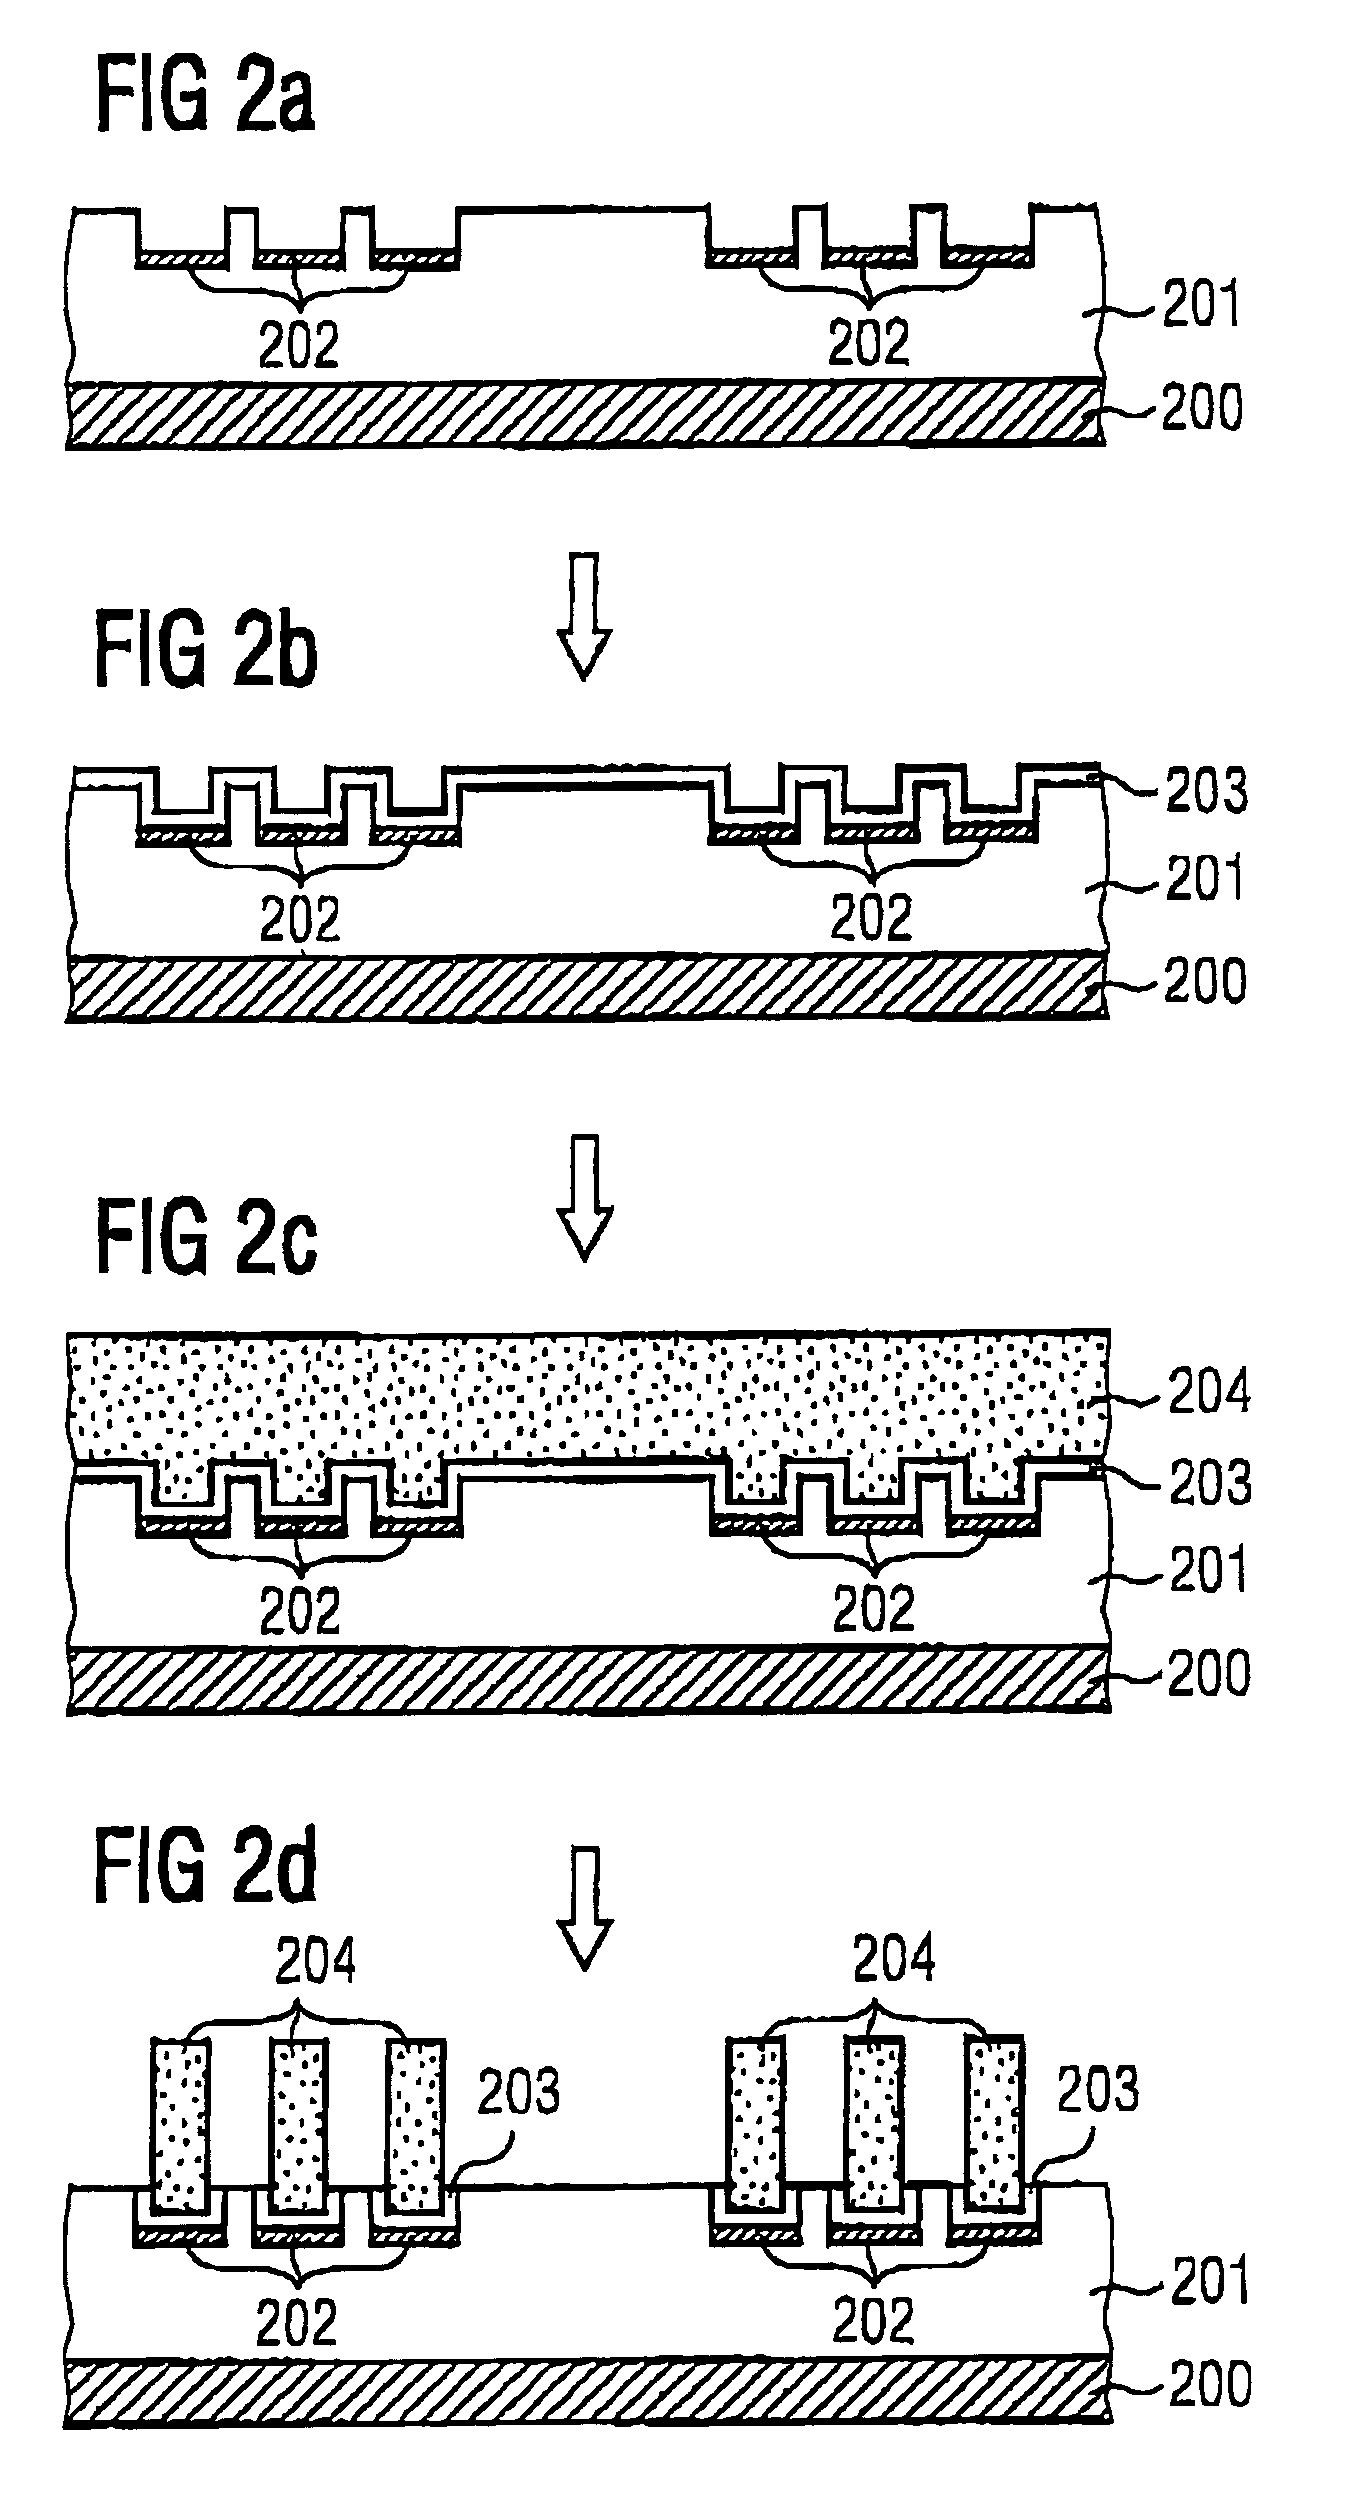 Method for fabricating a microelectronic circuit including applying metal over and thickening the integrated coil to increase conductivity